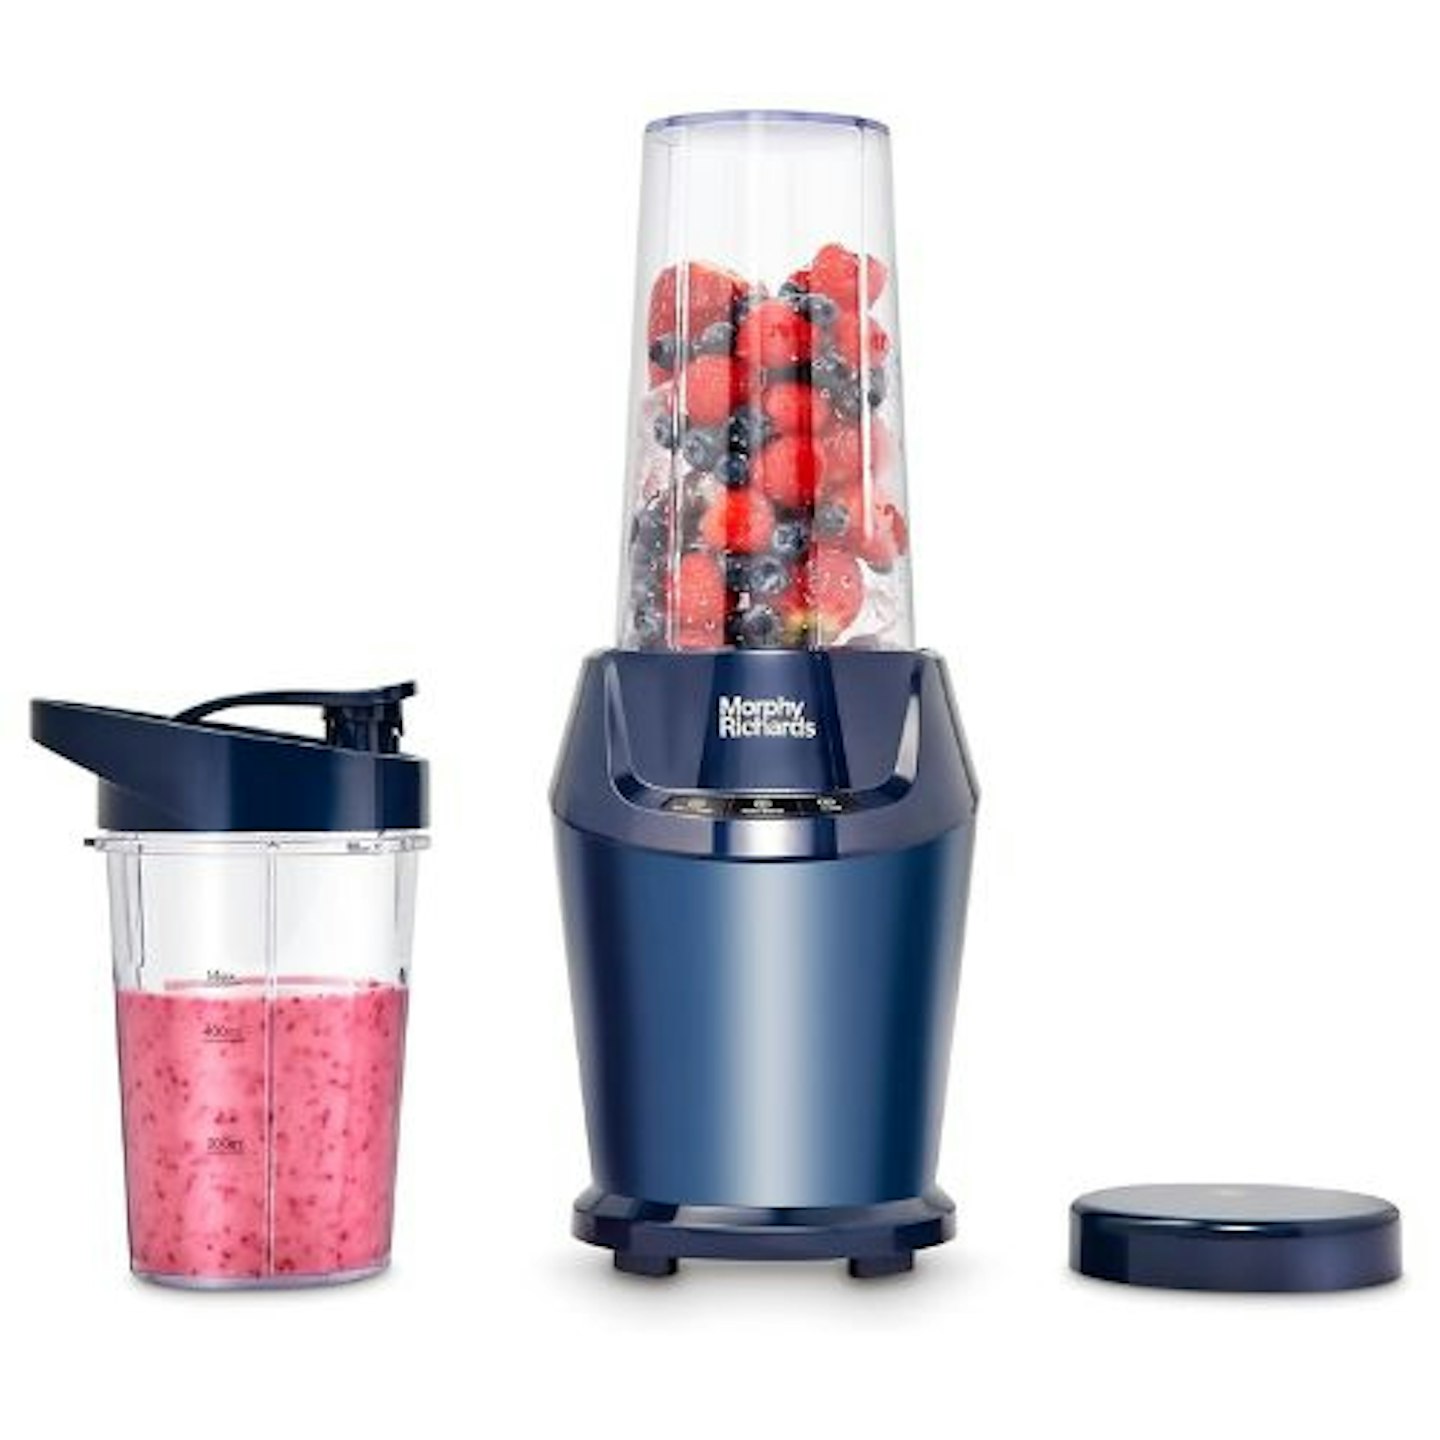 Morphy Richards Compact Personal Blender